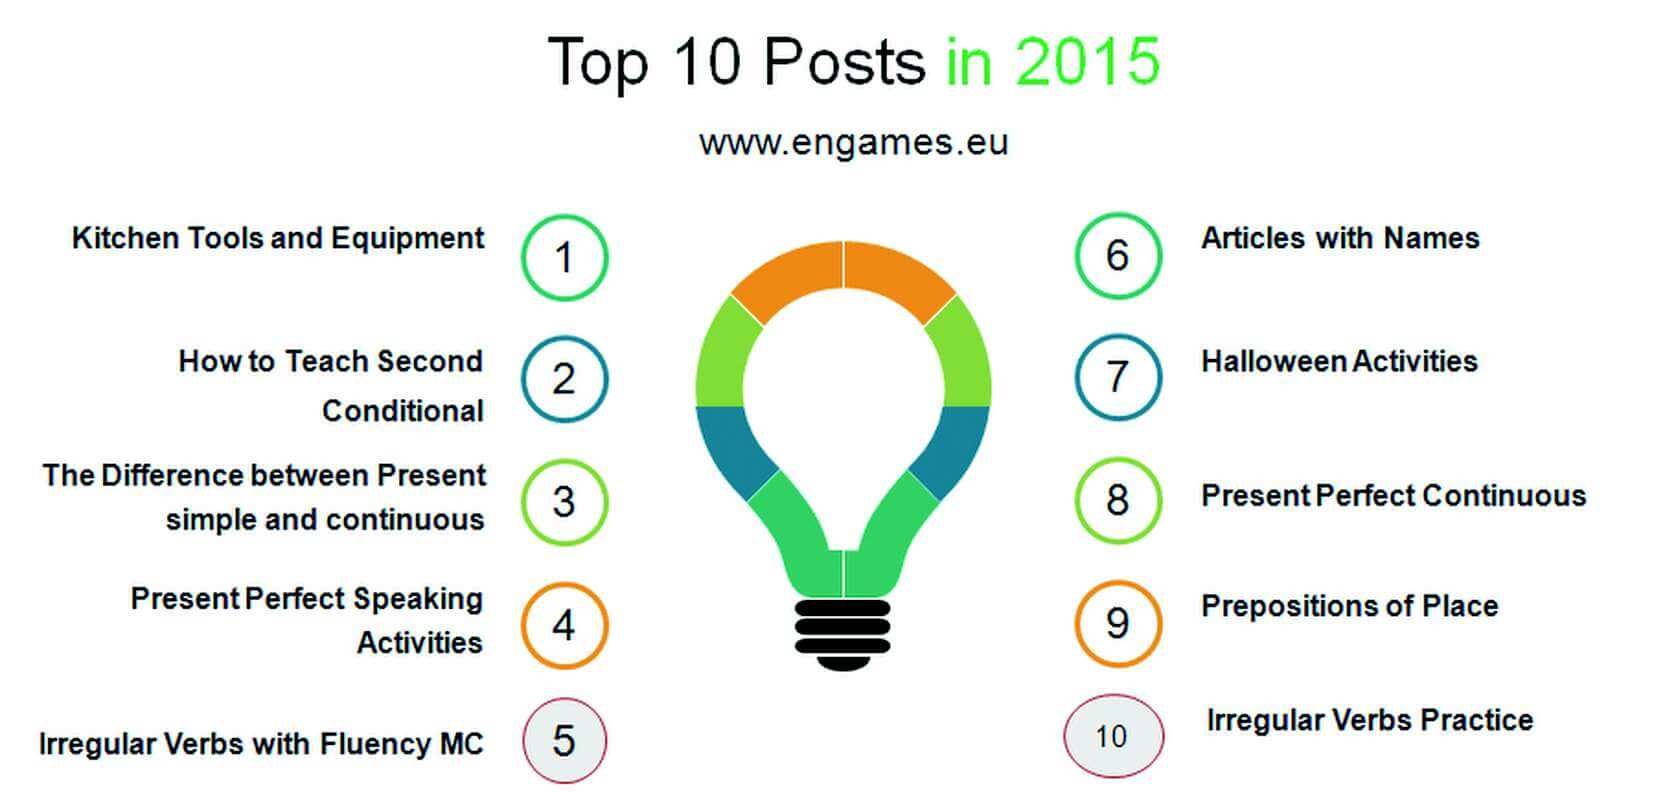 Top 10 posts in 2015